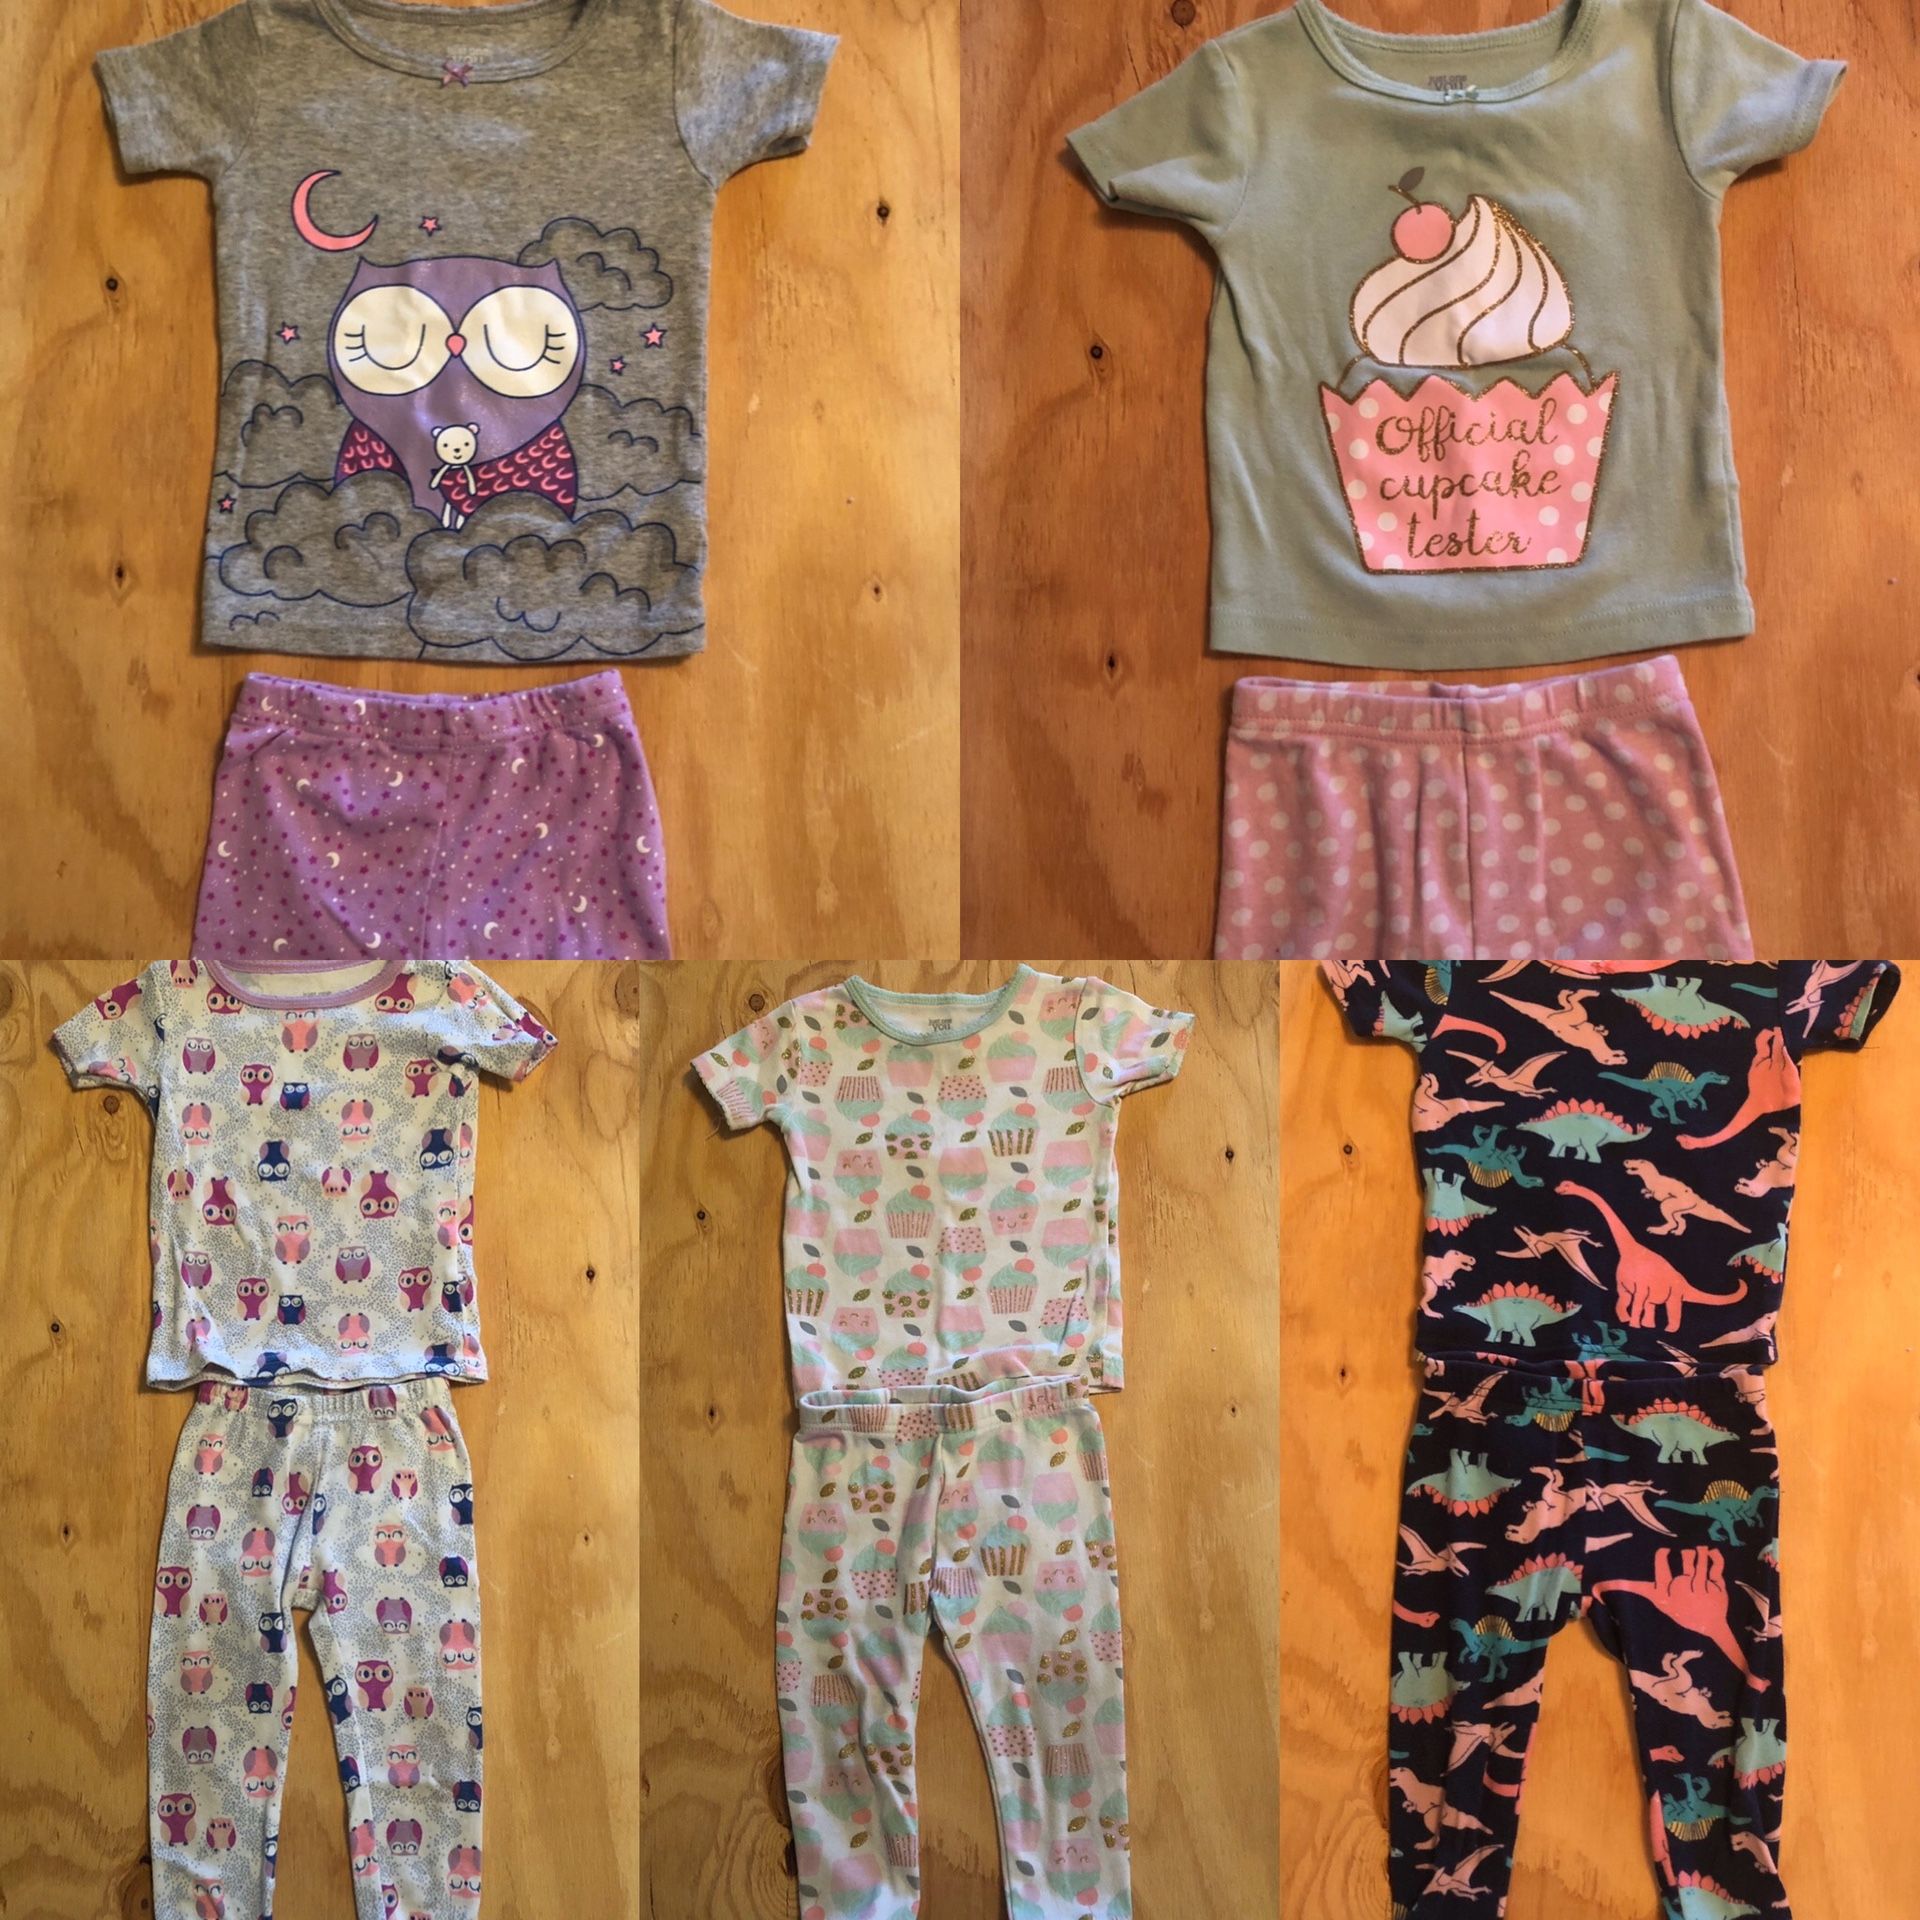 Baby girl pjs size 12 month, 5 pairs